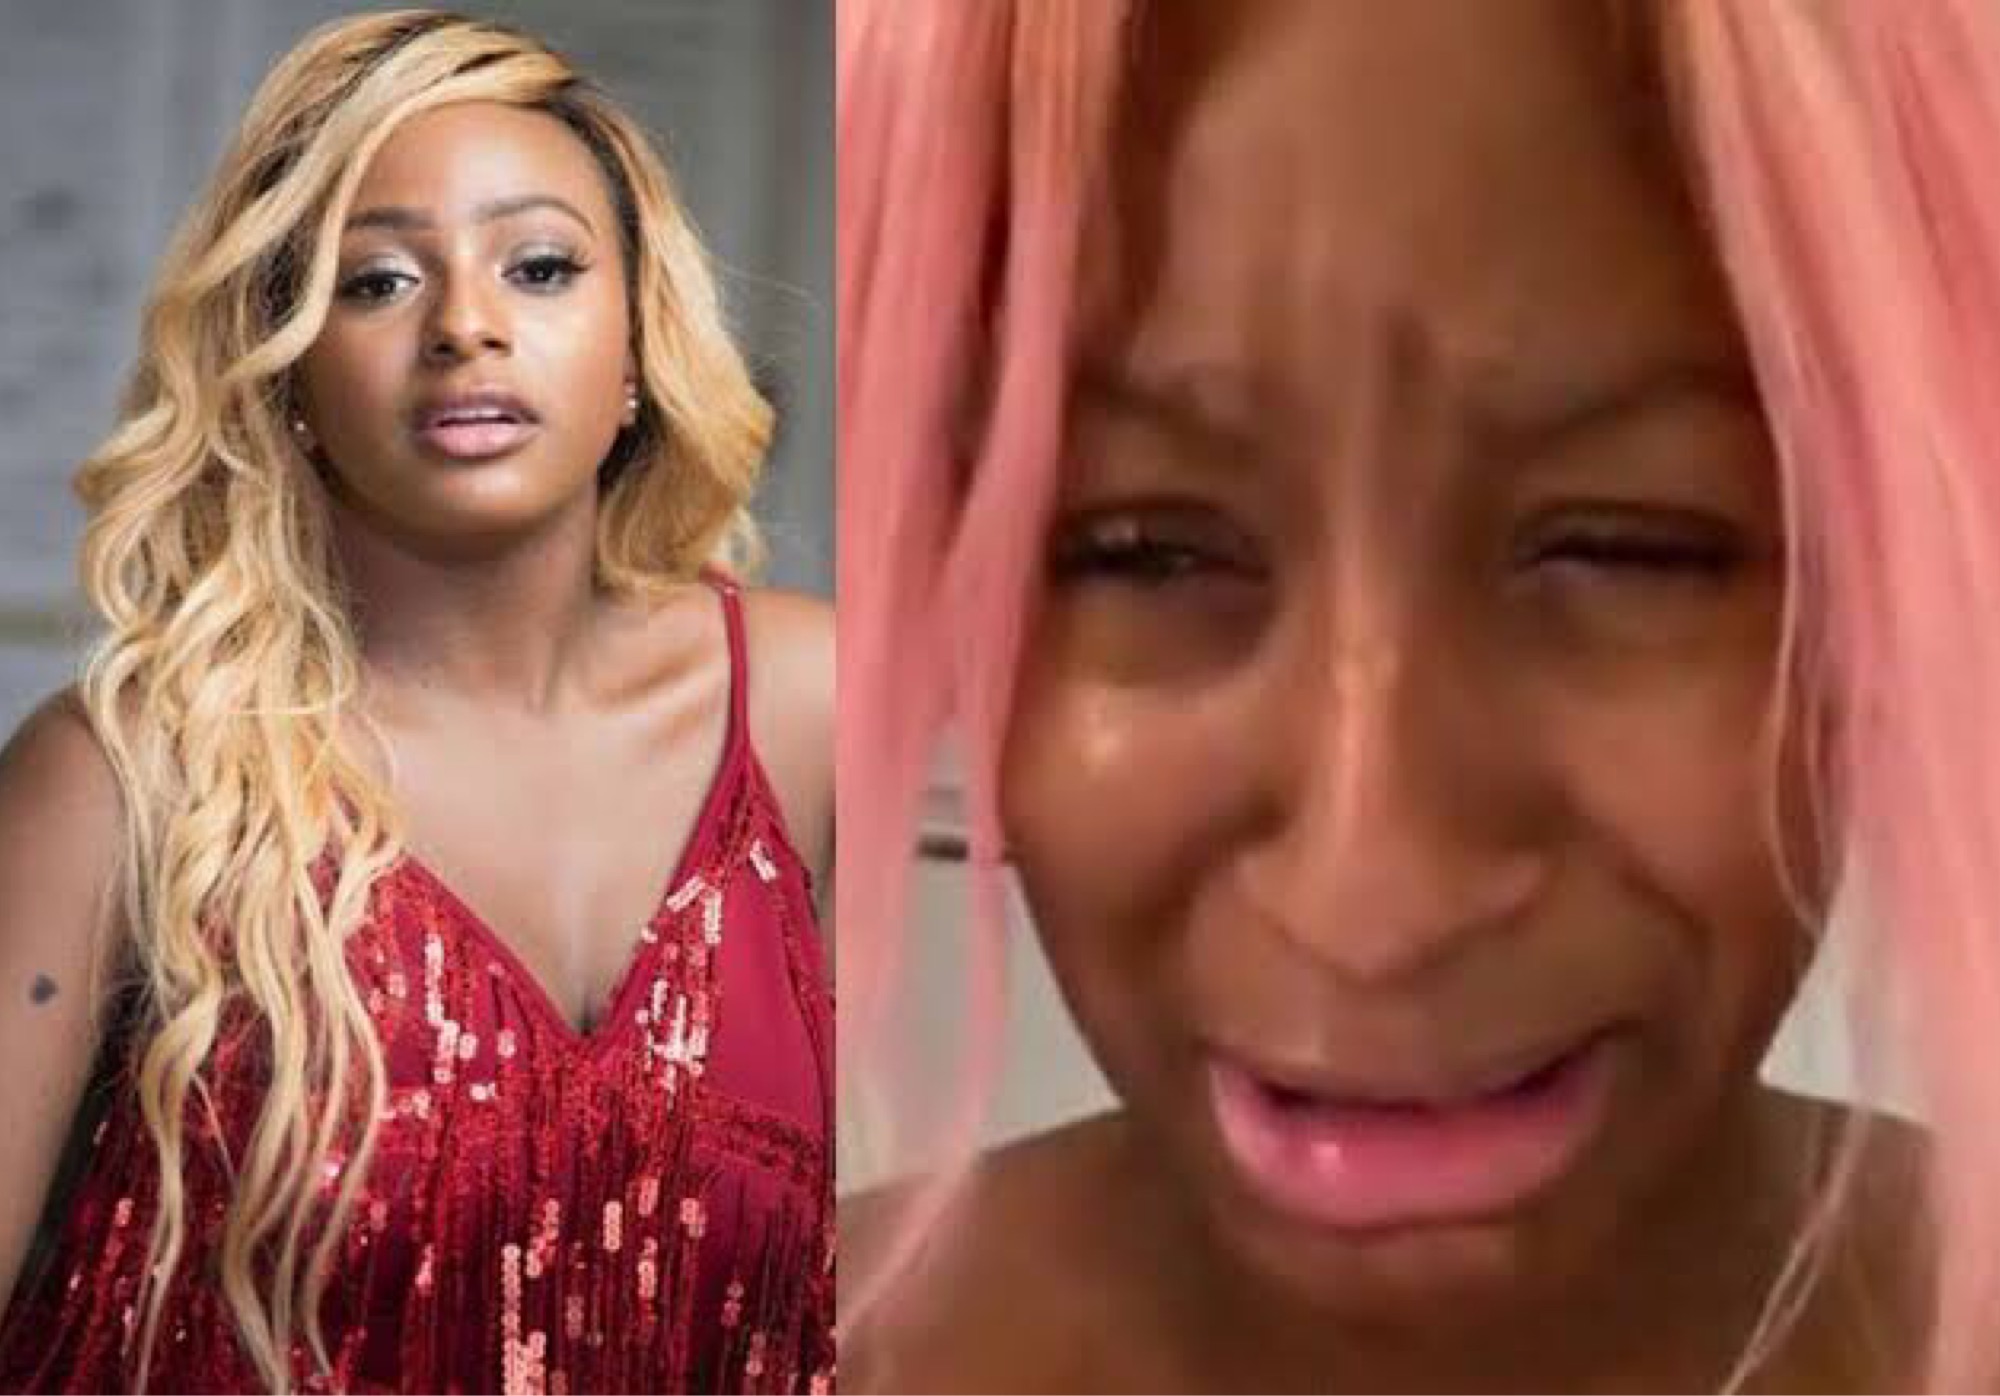 DJ Cuppy Breaks Down In Tears; Says She Is ‘Struggling With Emotions’